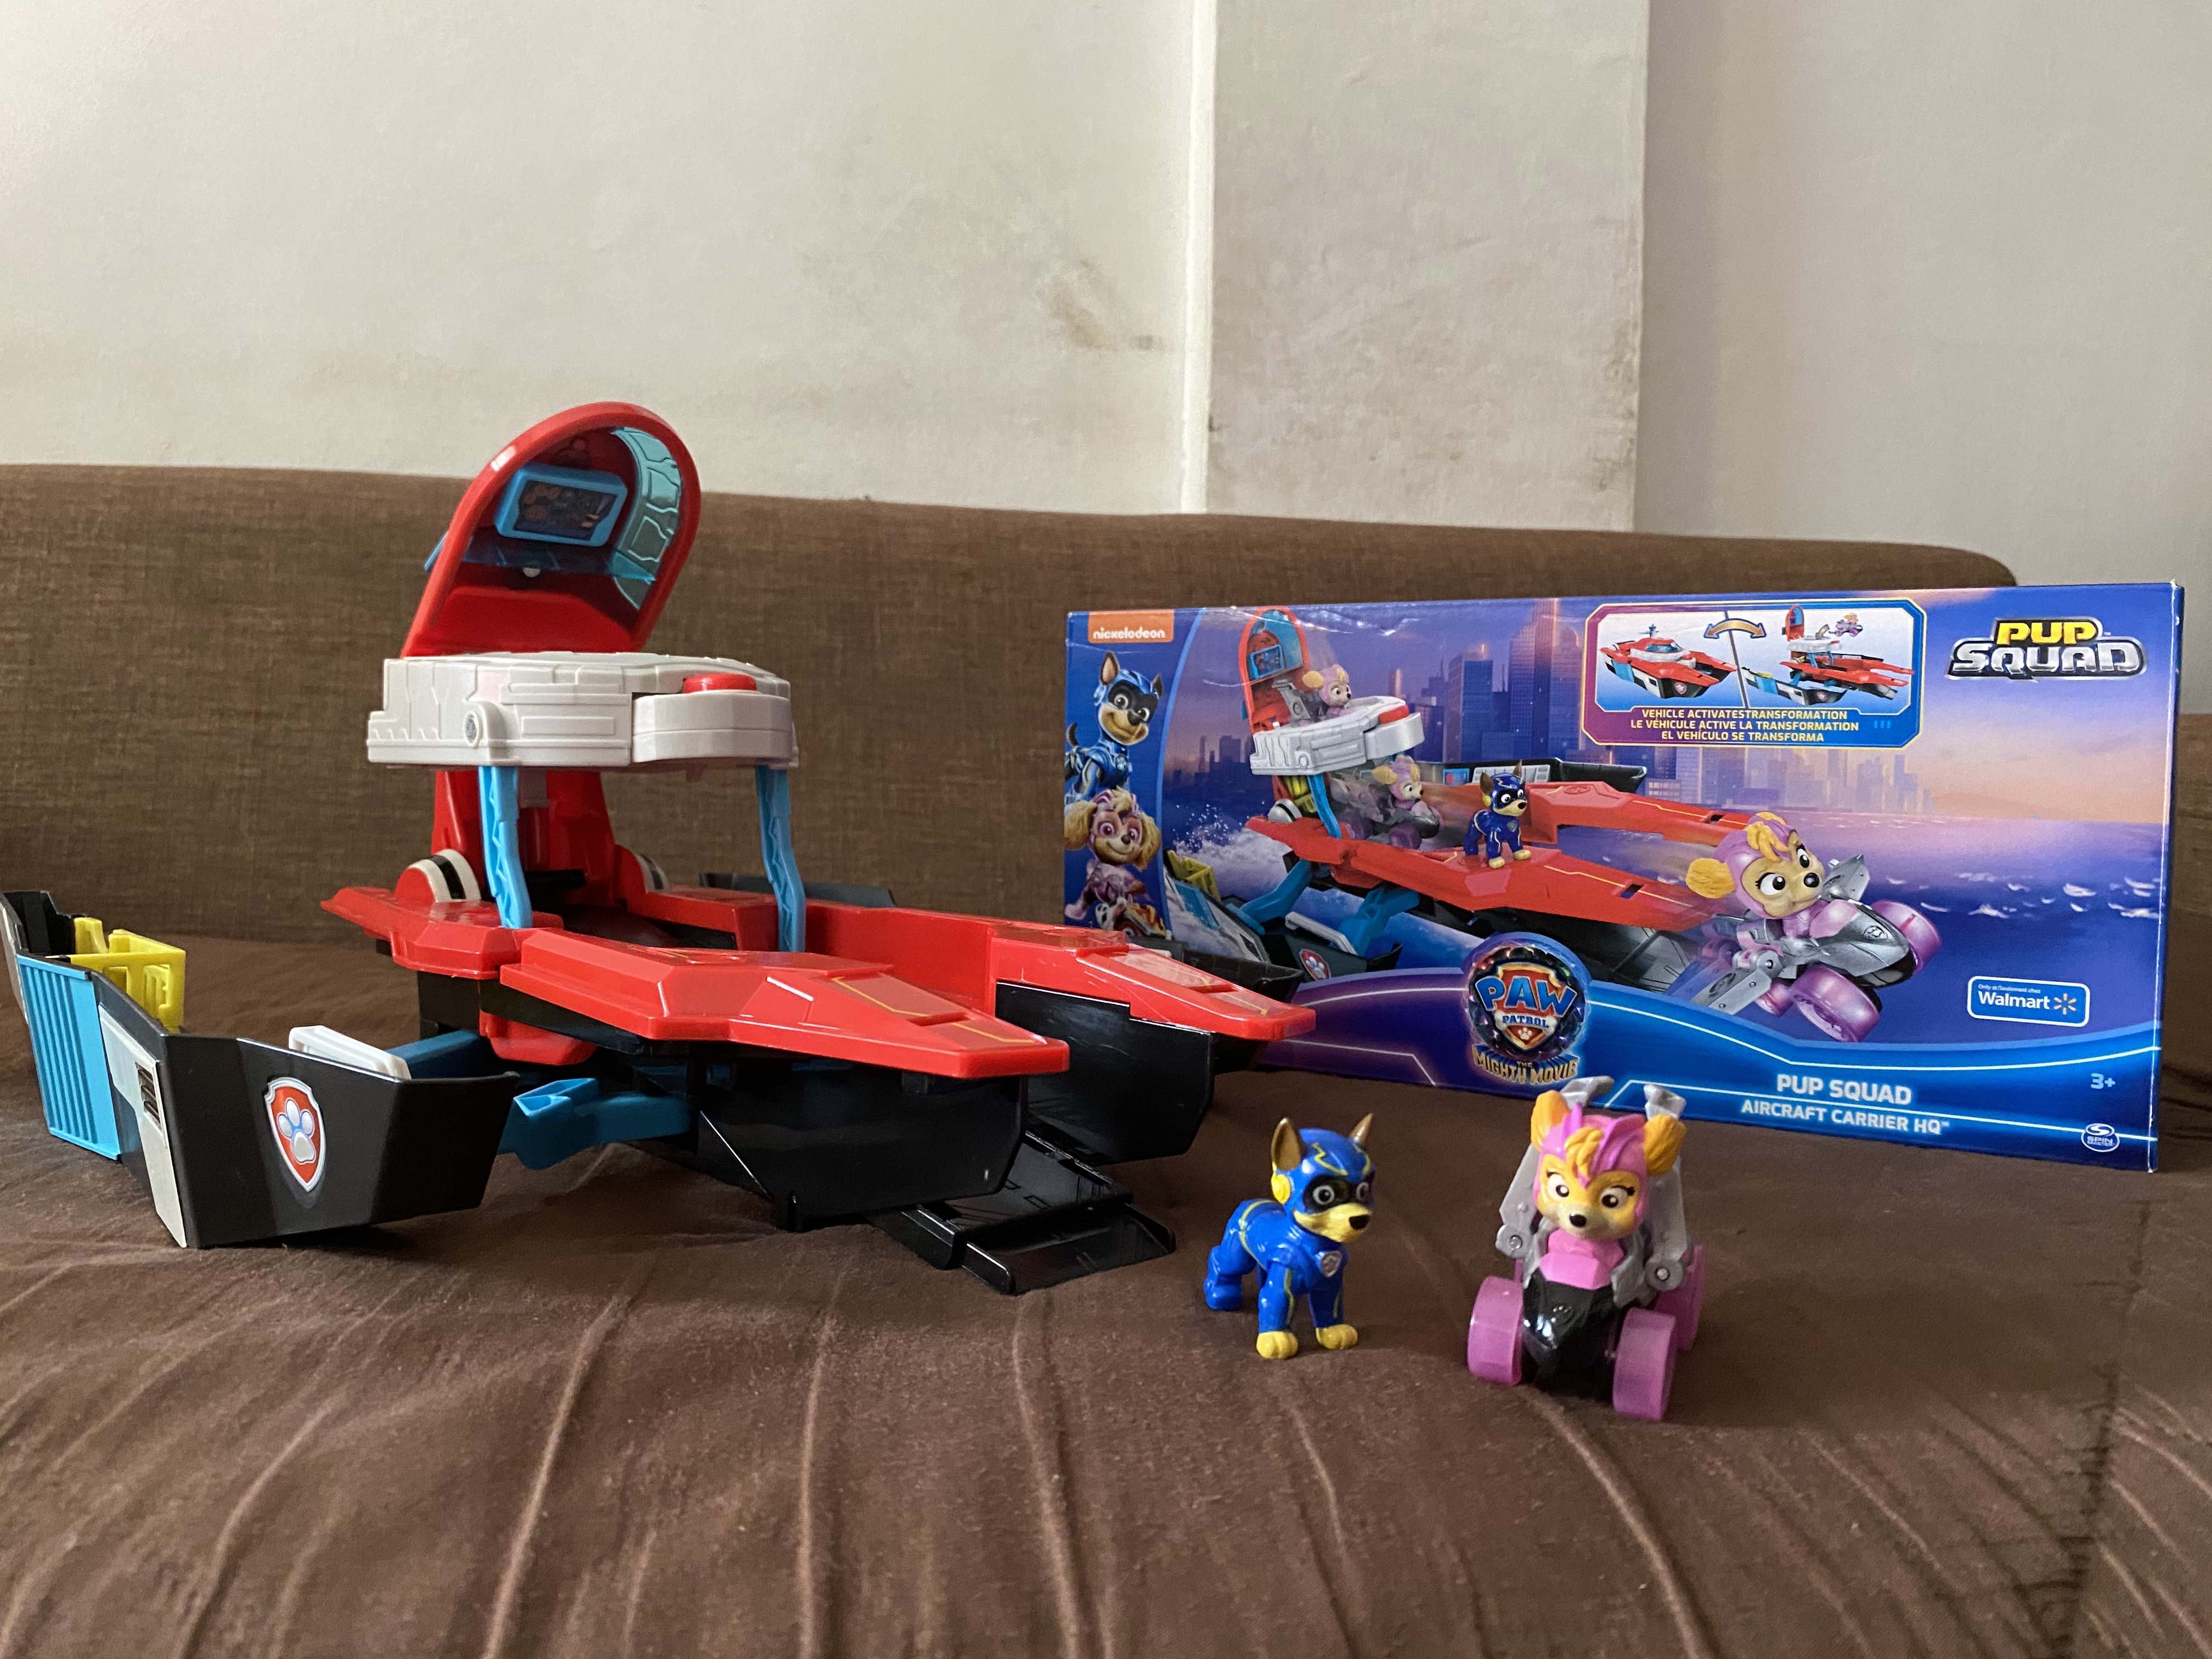 Live! Paw Patrol The Mighty Movie! Pup Squad Aircraft Carrier HQ UNBOXING!  